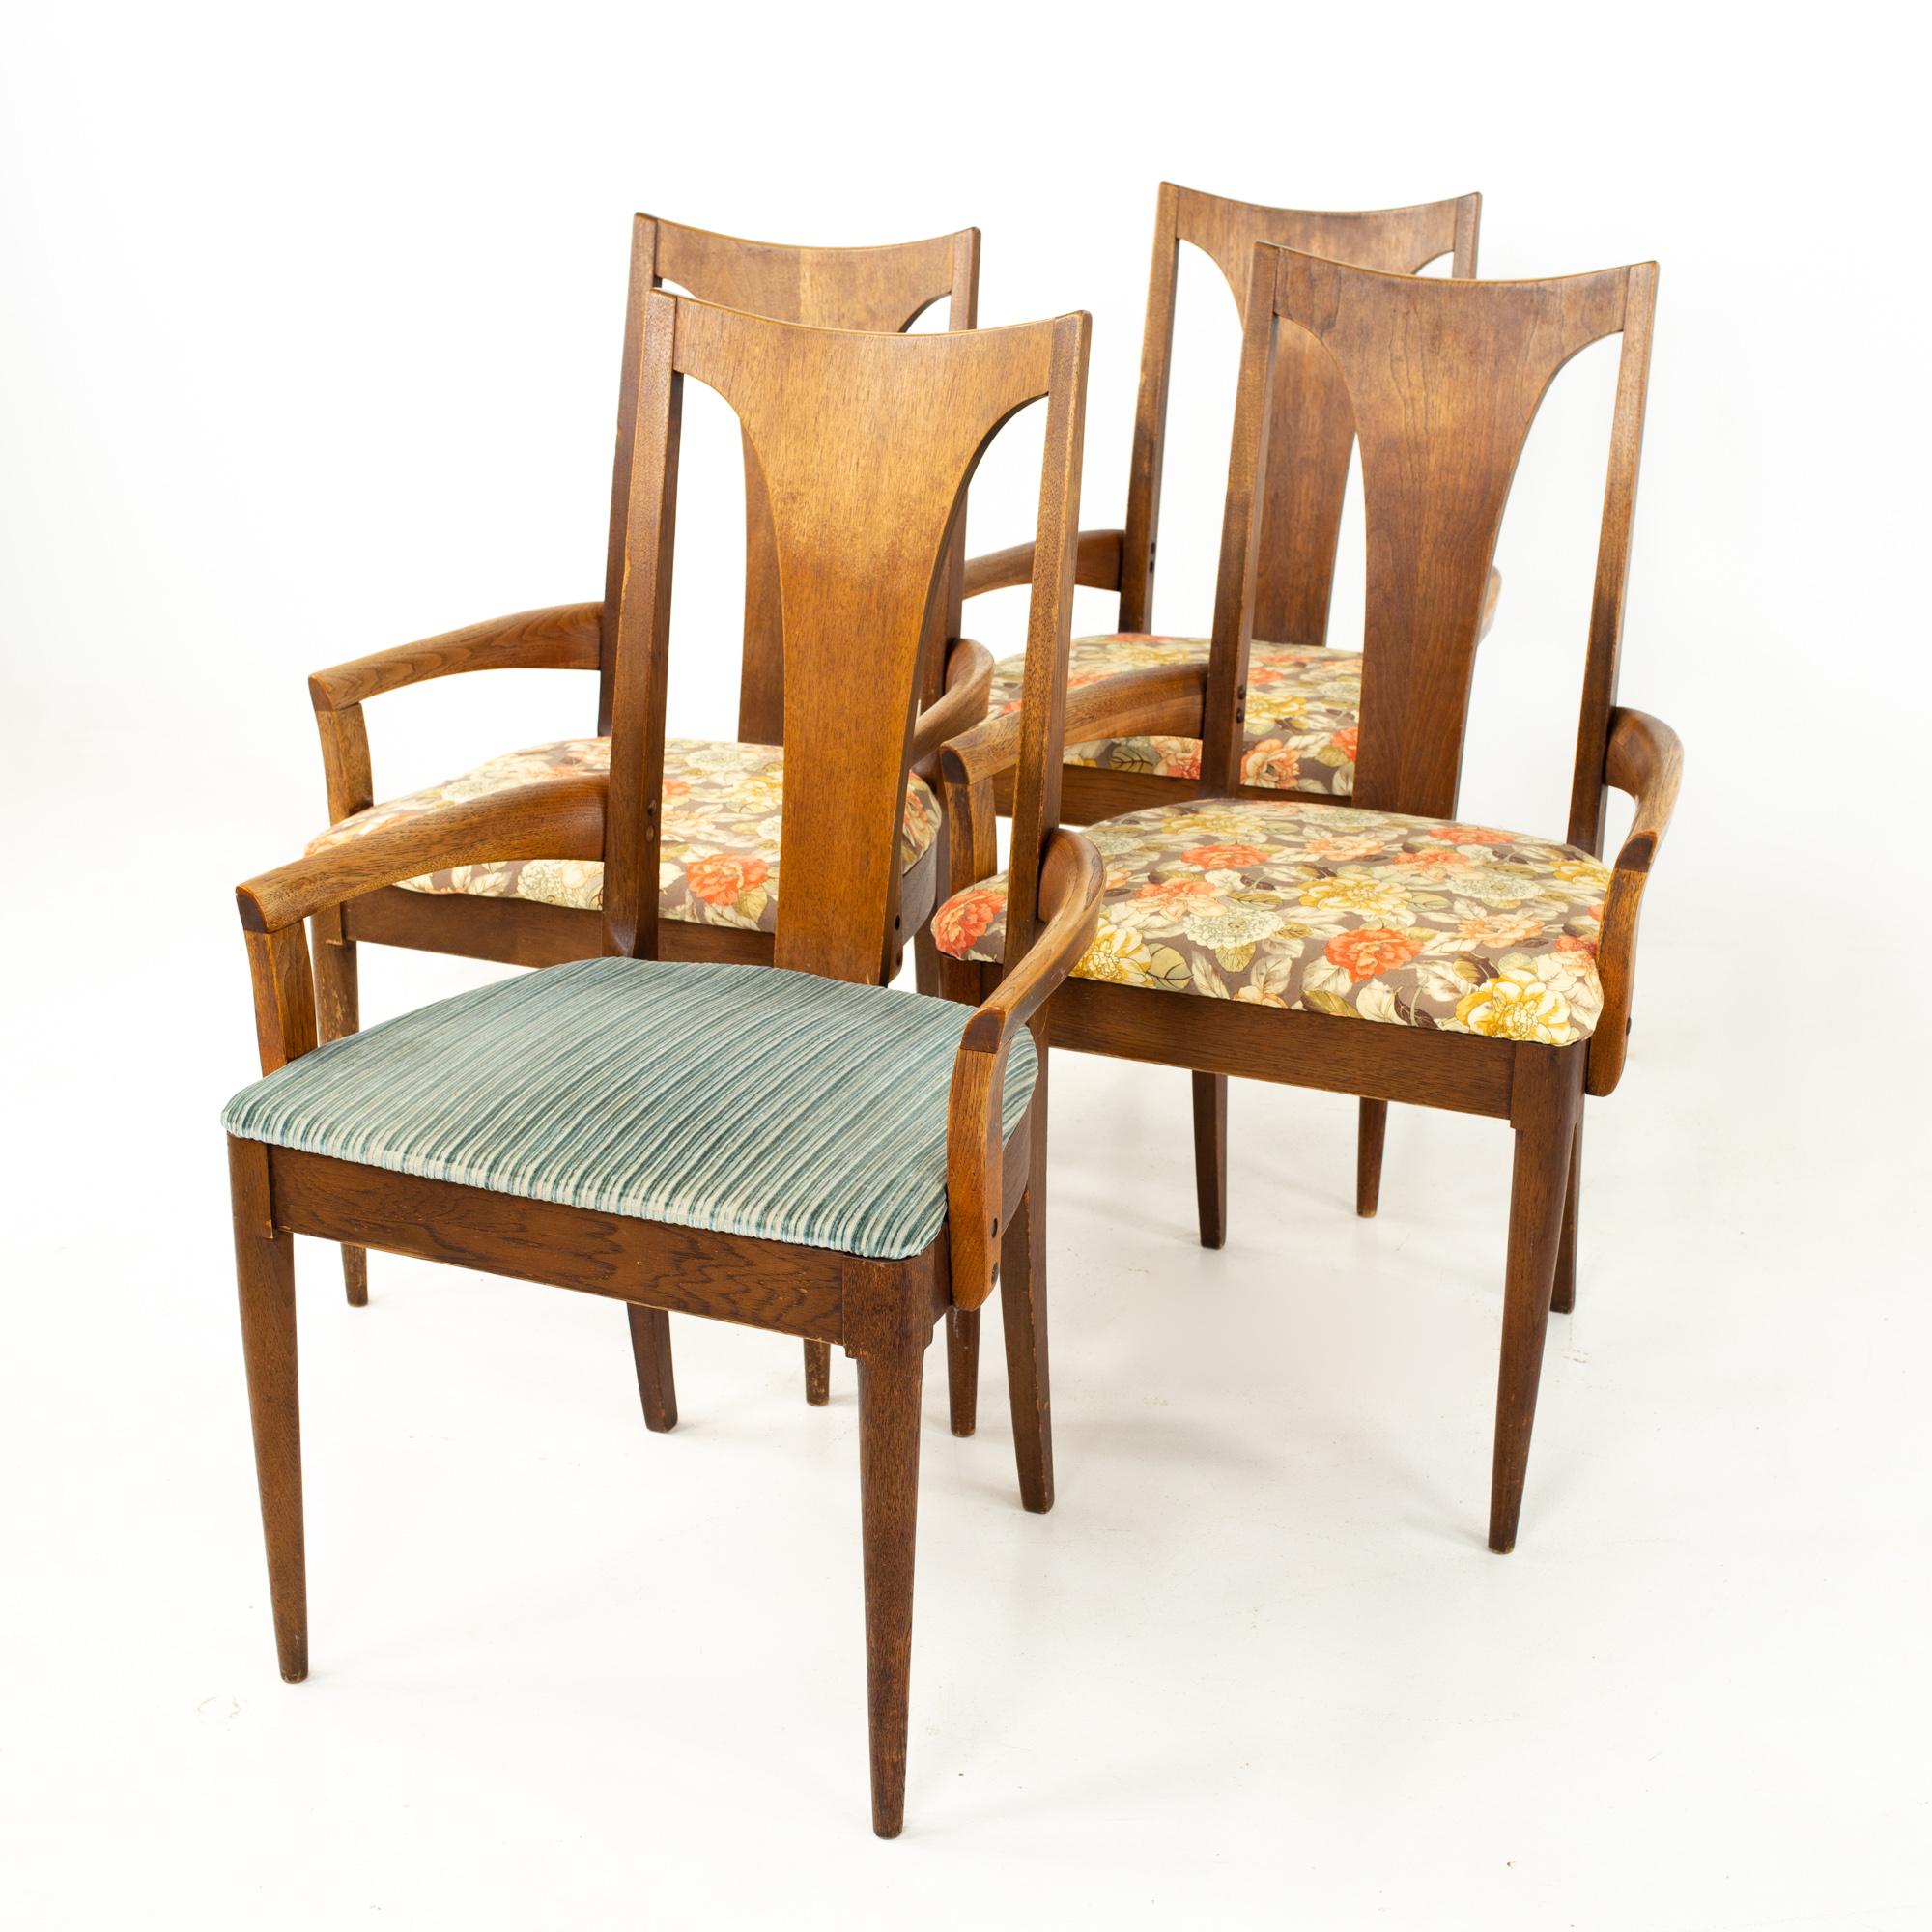 Broyhill Brasilia II mid century walnut captains dining chairs - set of 4
Each chair measures: 22.75 wide x 21 deep x 37 high, with a seat height of 18.25 inches  

All pieces of furniture can be had in what we call restored vintage condition.